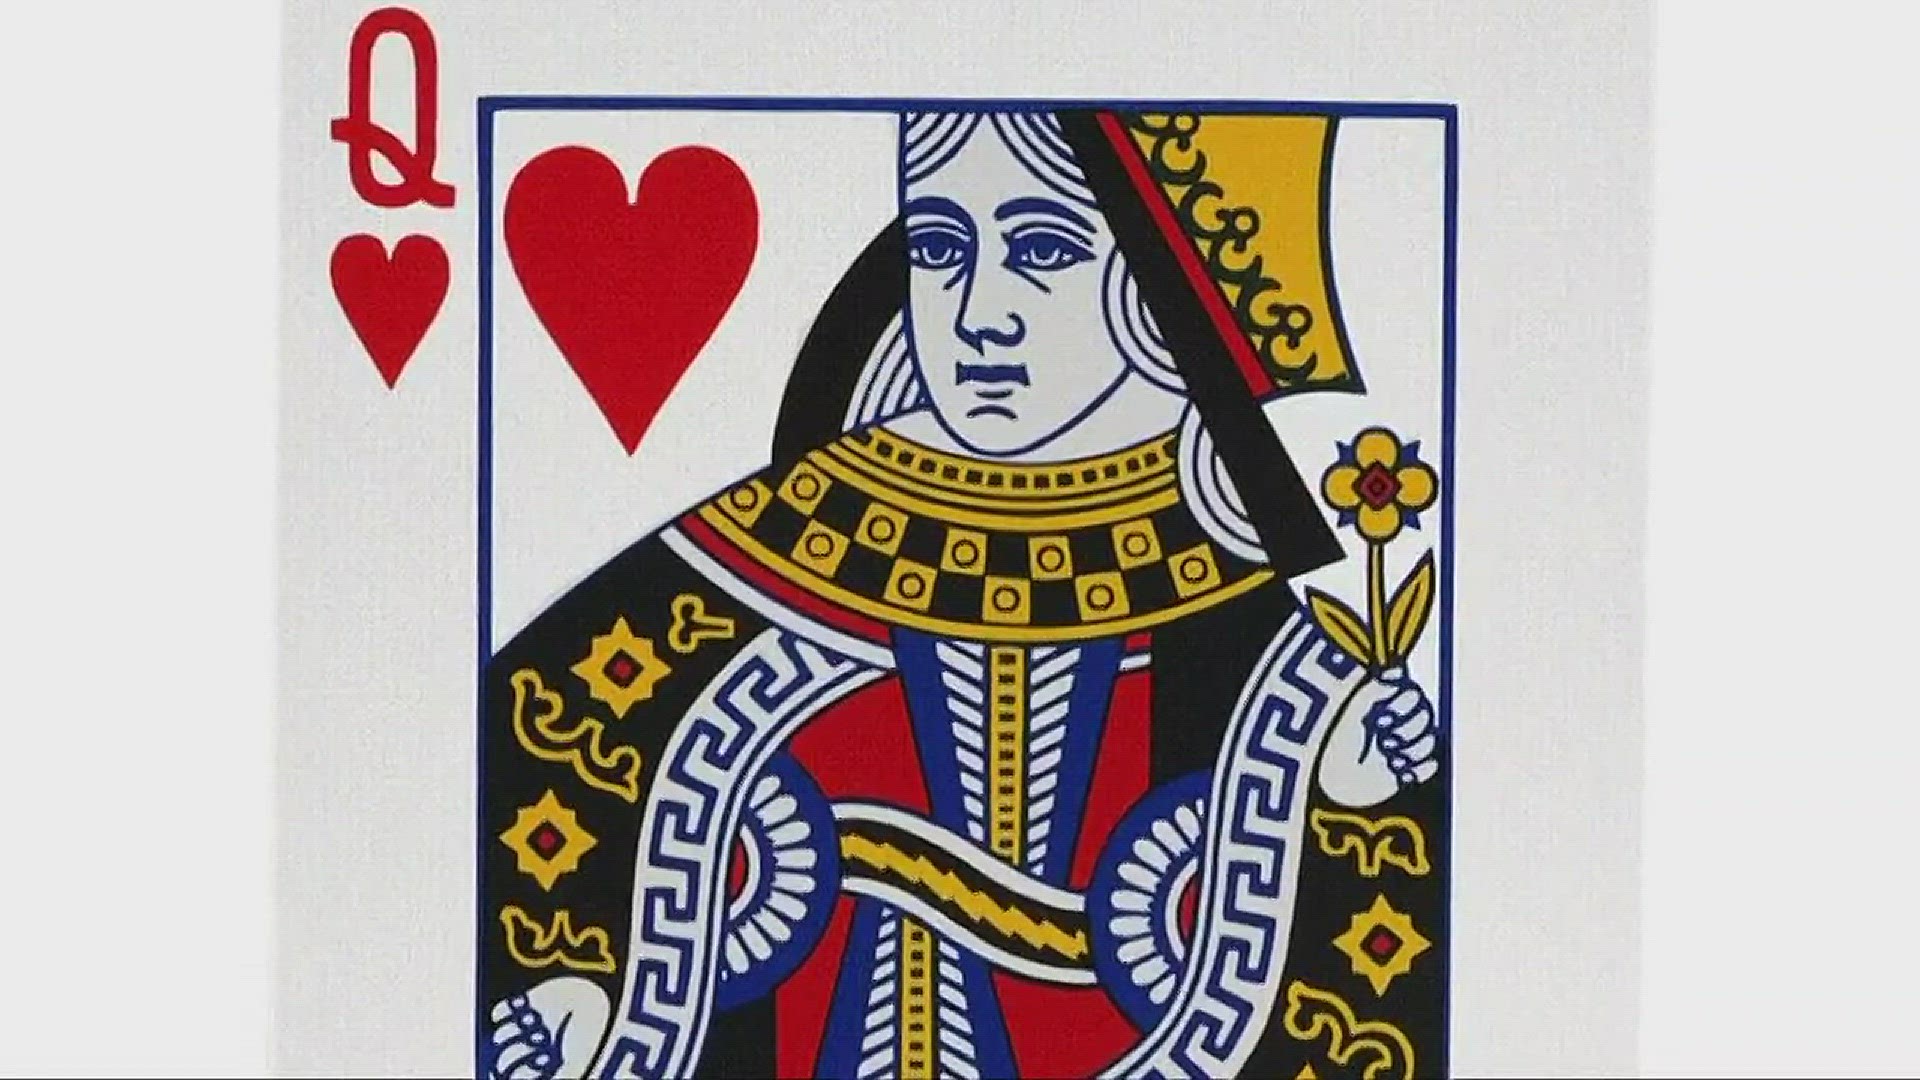 March 14, 2018: Somebody could become a multimillionaire in tonight's Queen of Hearts drawing at the Grayton Road Tavern.